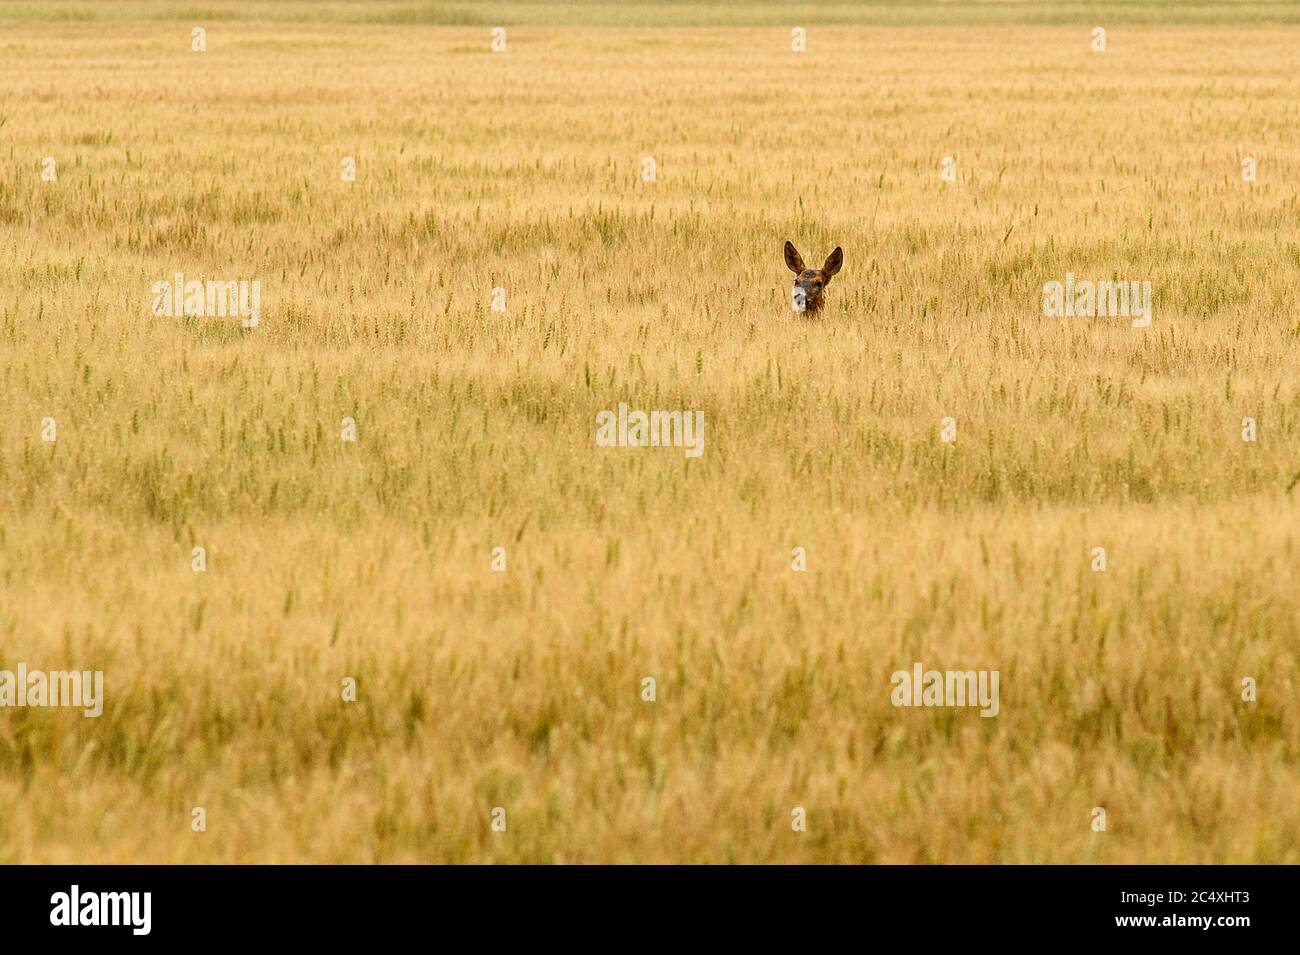 29 June 2020, Saxony-Anhalt, Zeppernick: A deer looks over the high ears of a corn field. In the Jerichower Land it has become summer. The cornfields are about to be harvested. Sometimes thunderstorm cells form, their dark clouds raining down on the dry land. Photo: Klaus-Dietmar Gabbert/dpa-Zentralbild/ZB Stock Photo